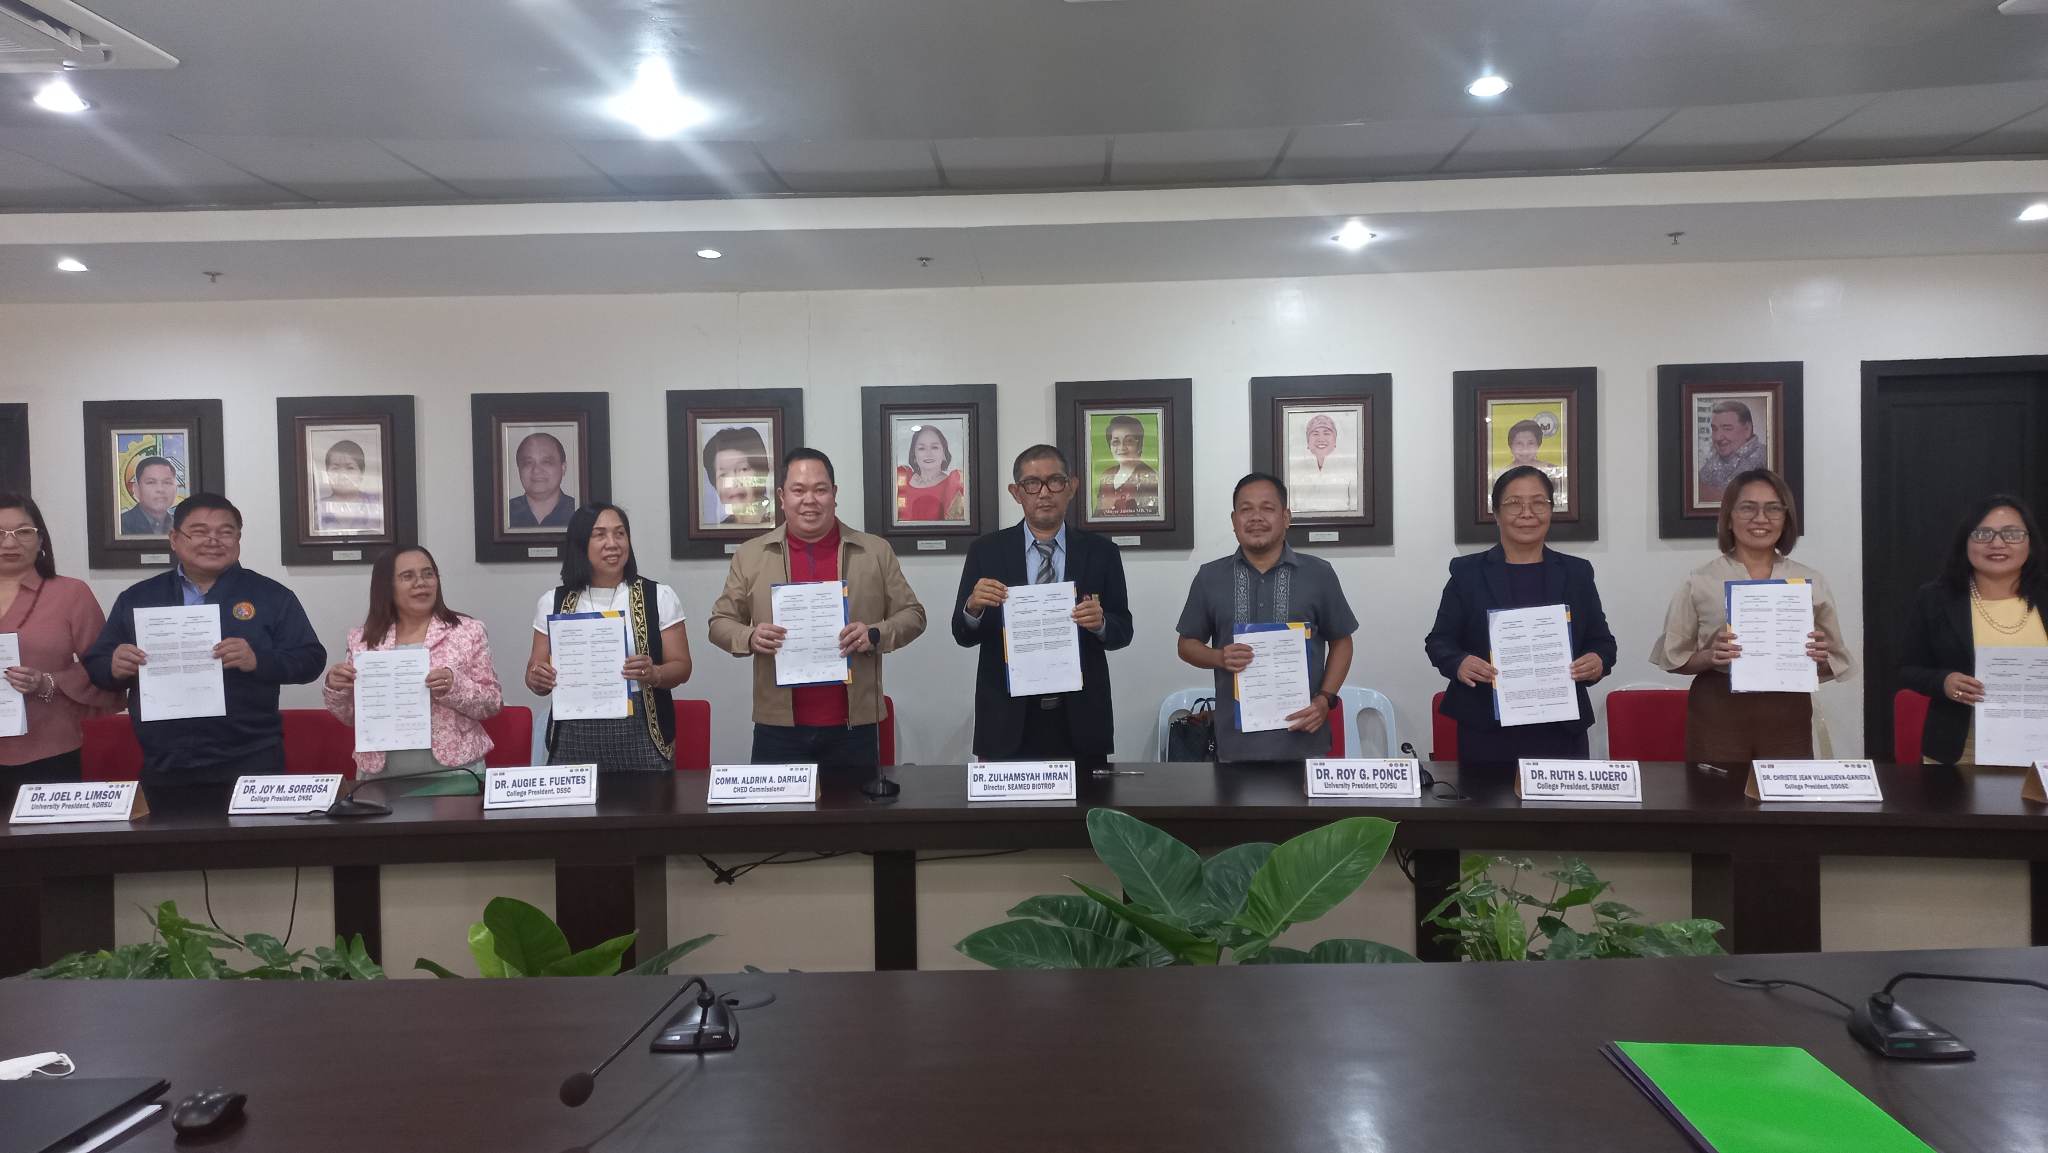 CBSUA, SEAMEO-BIOTROP INDONESIA SIGN MOU TO PROMOTE TROPICAL BIOLOGY RESEARCH AND BIODIVERSITY CONSERVATION IN BICOL